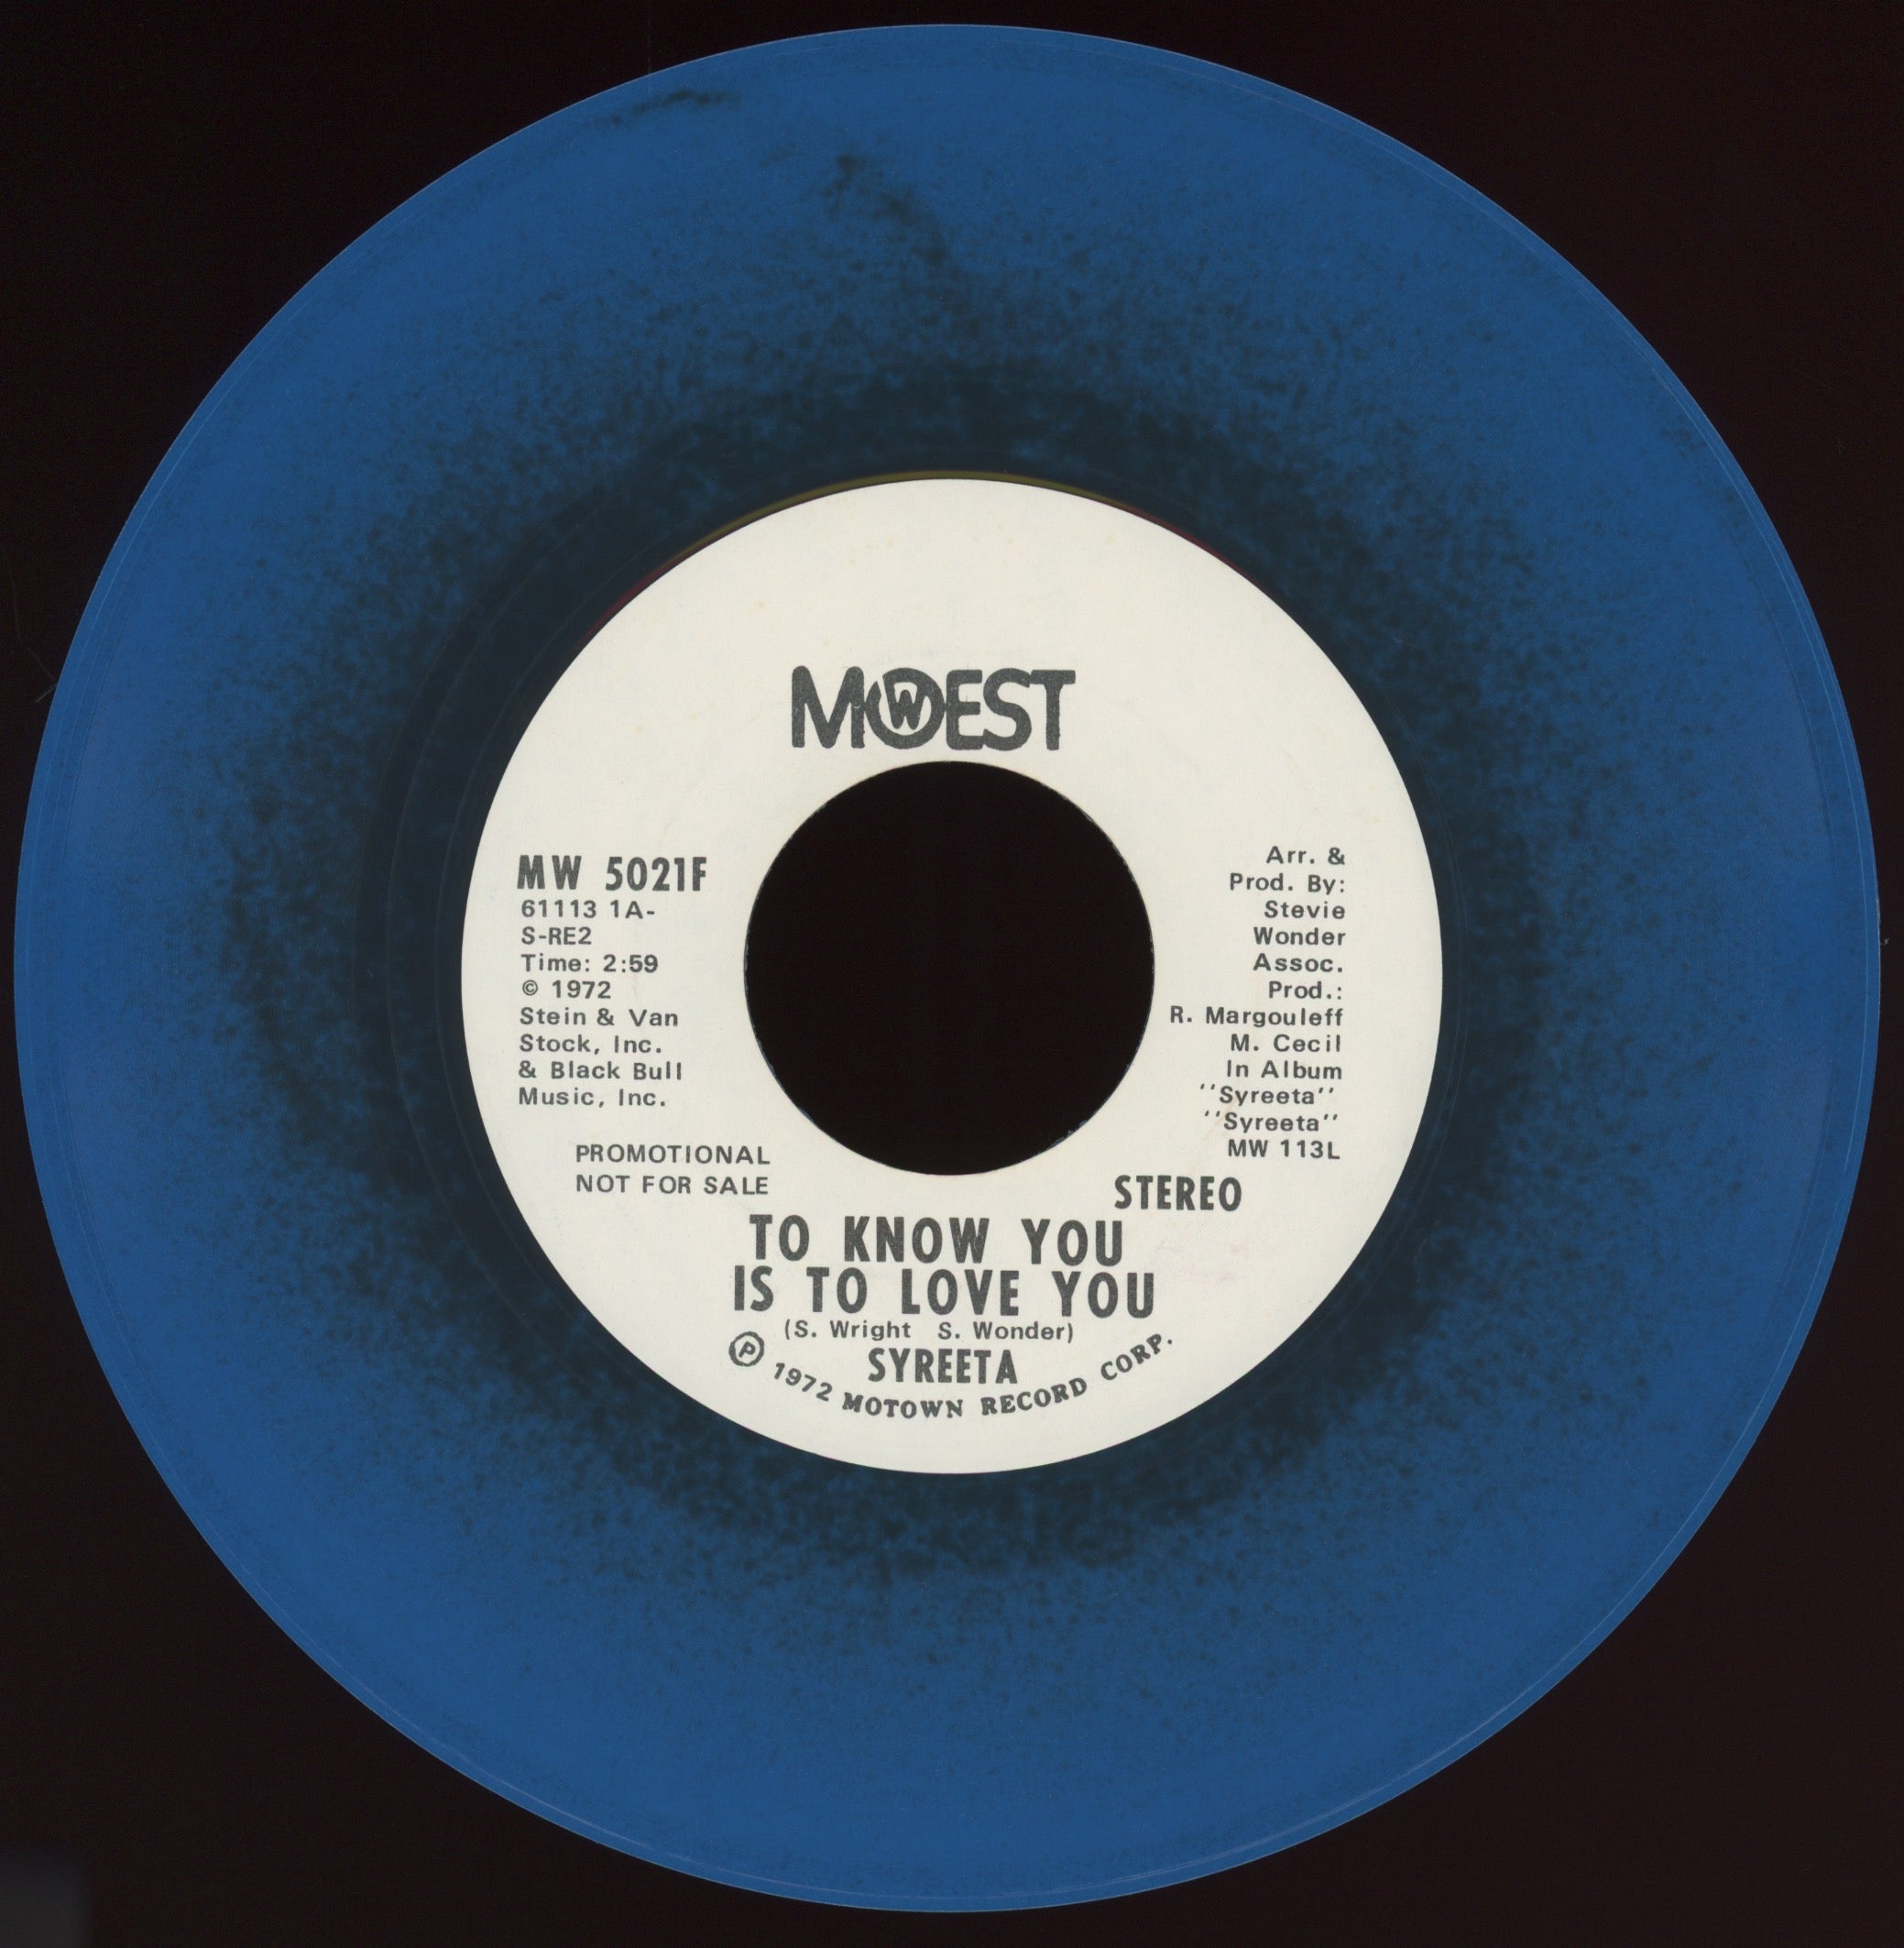 Syreeta - To Know You Is To Love You on Mowest Blue Vinyl Promo